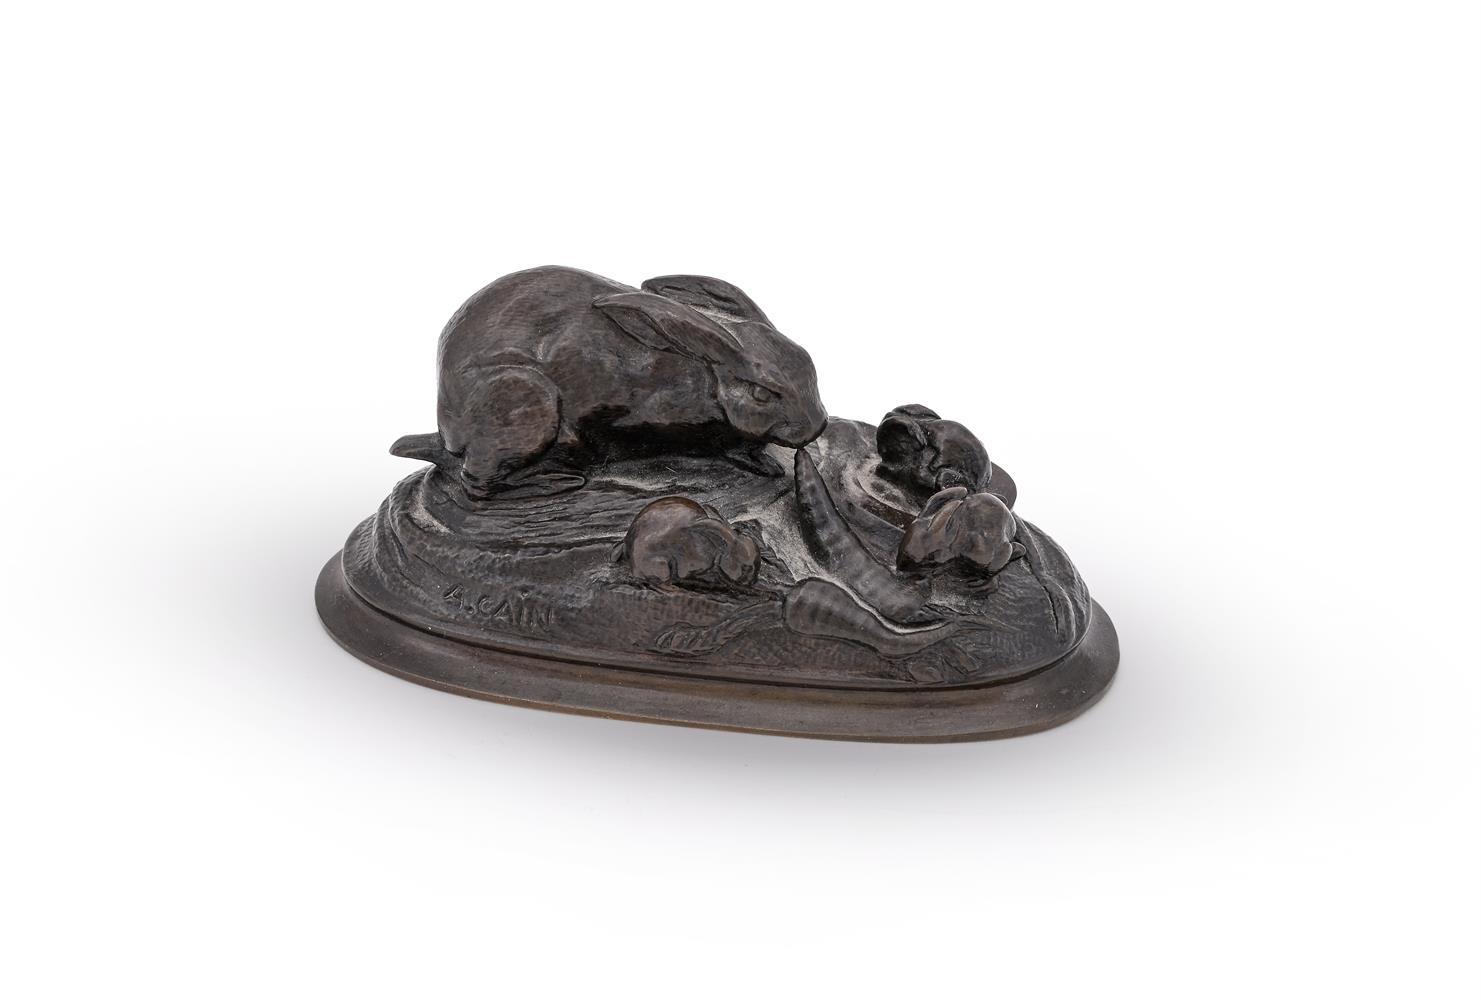 AUGUSTE CAIN (FRENCH, 1821-1894), A BRONZE MODEL OF RABBIT WITH YOUNG - Image 2 of 5